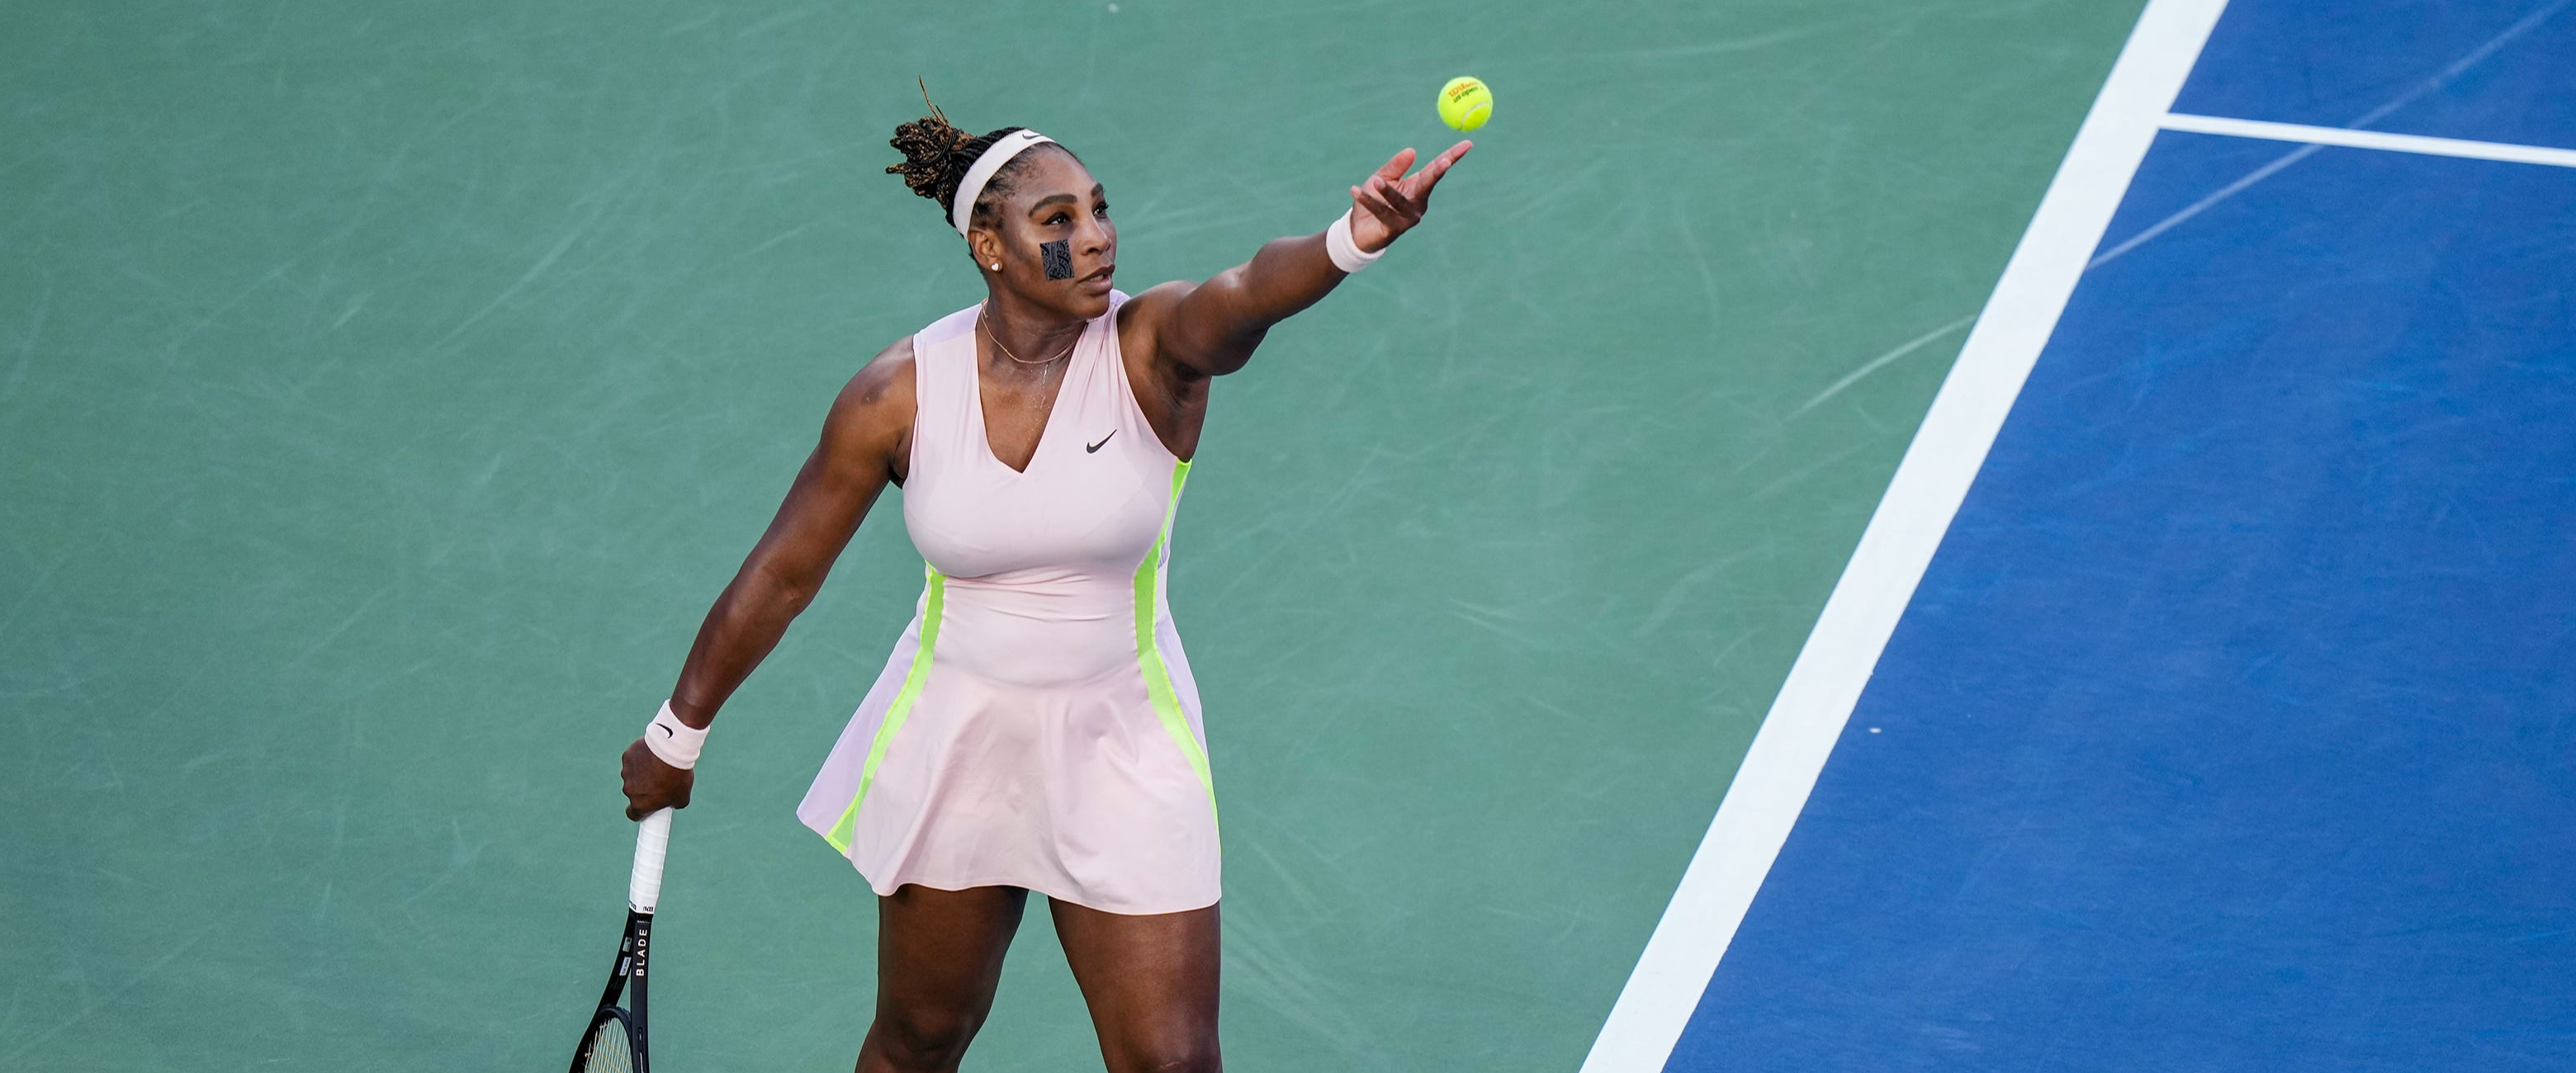 U.S. Open: When are where to watch Serena Williams' first-round match